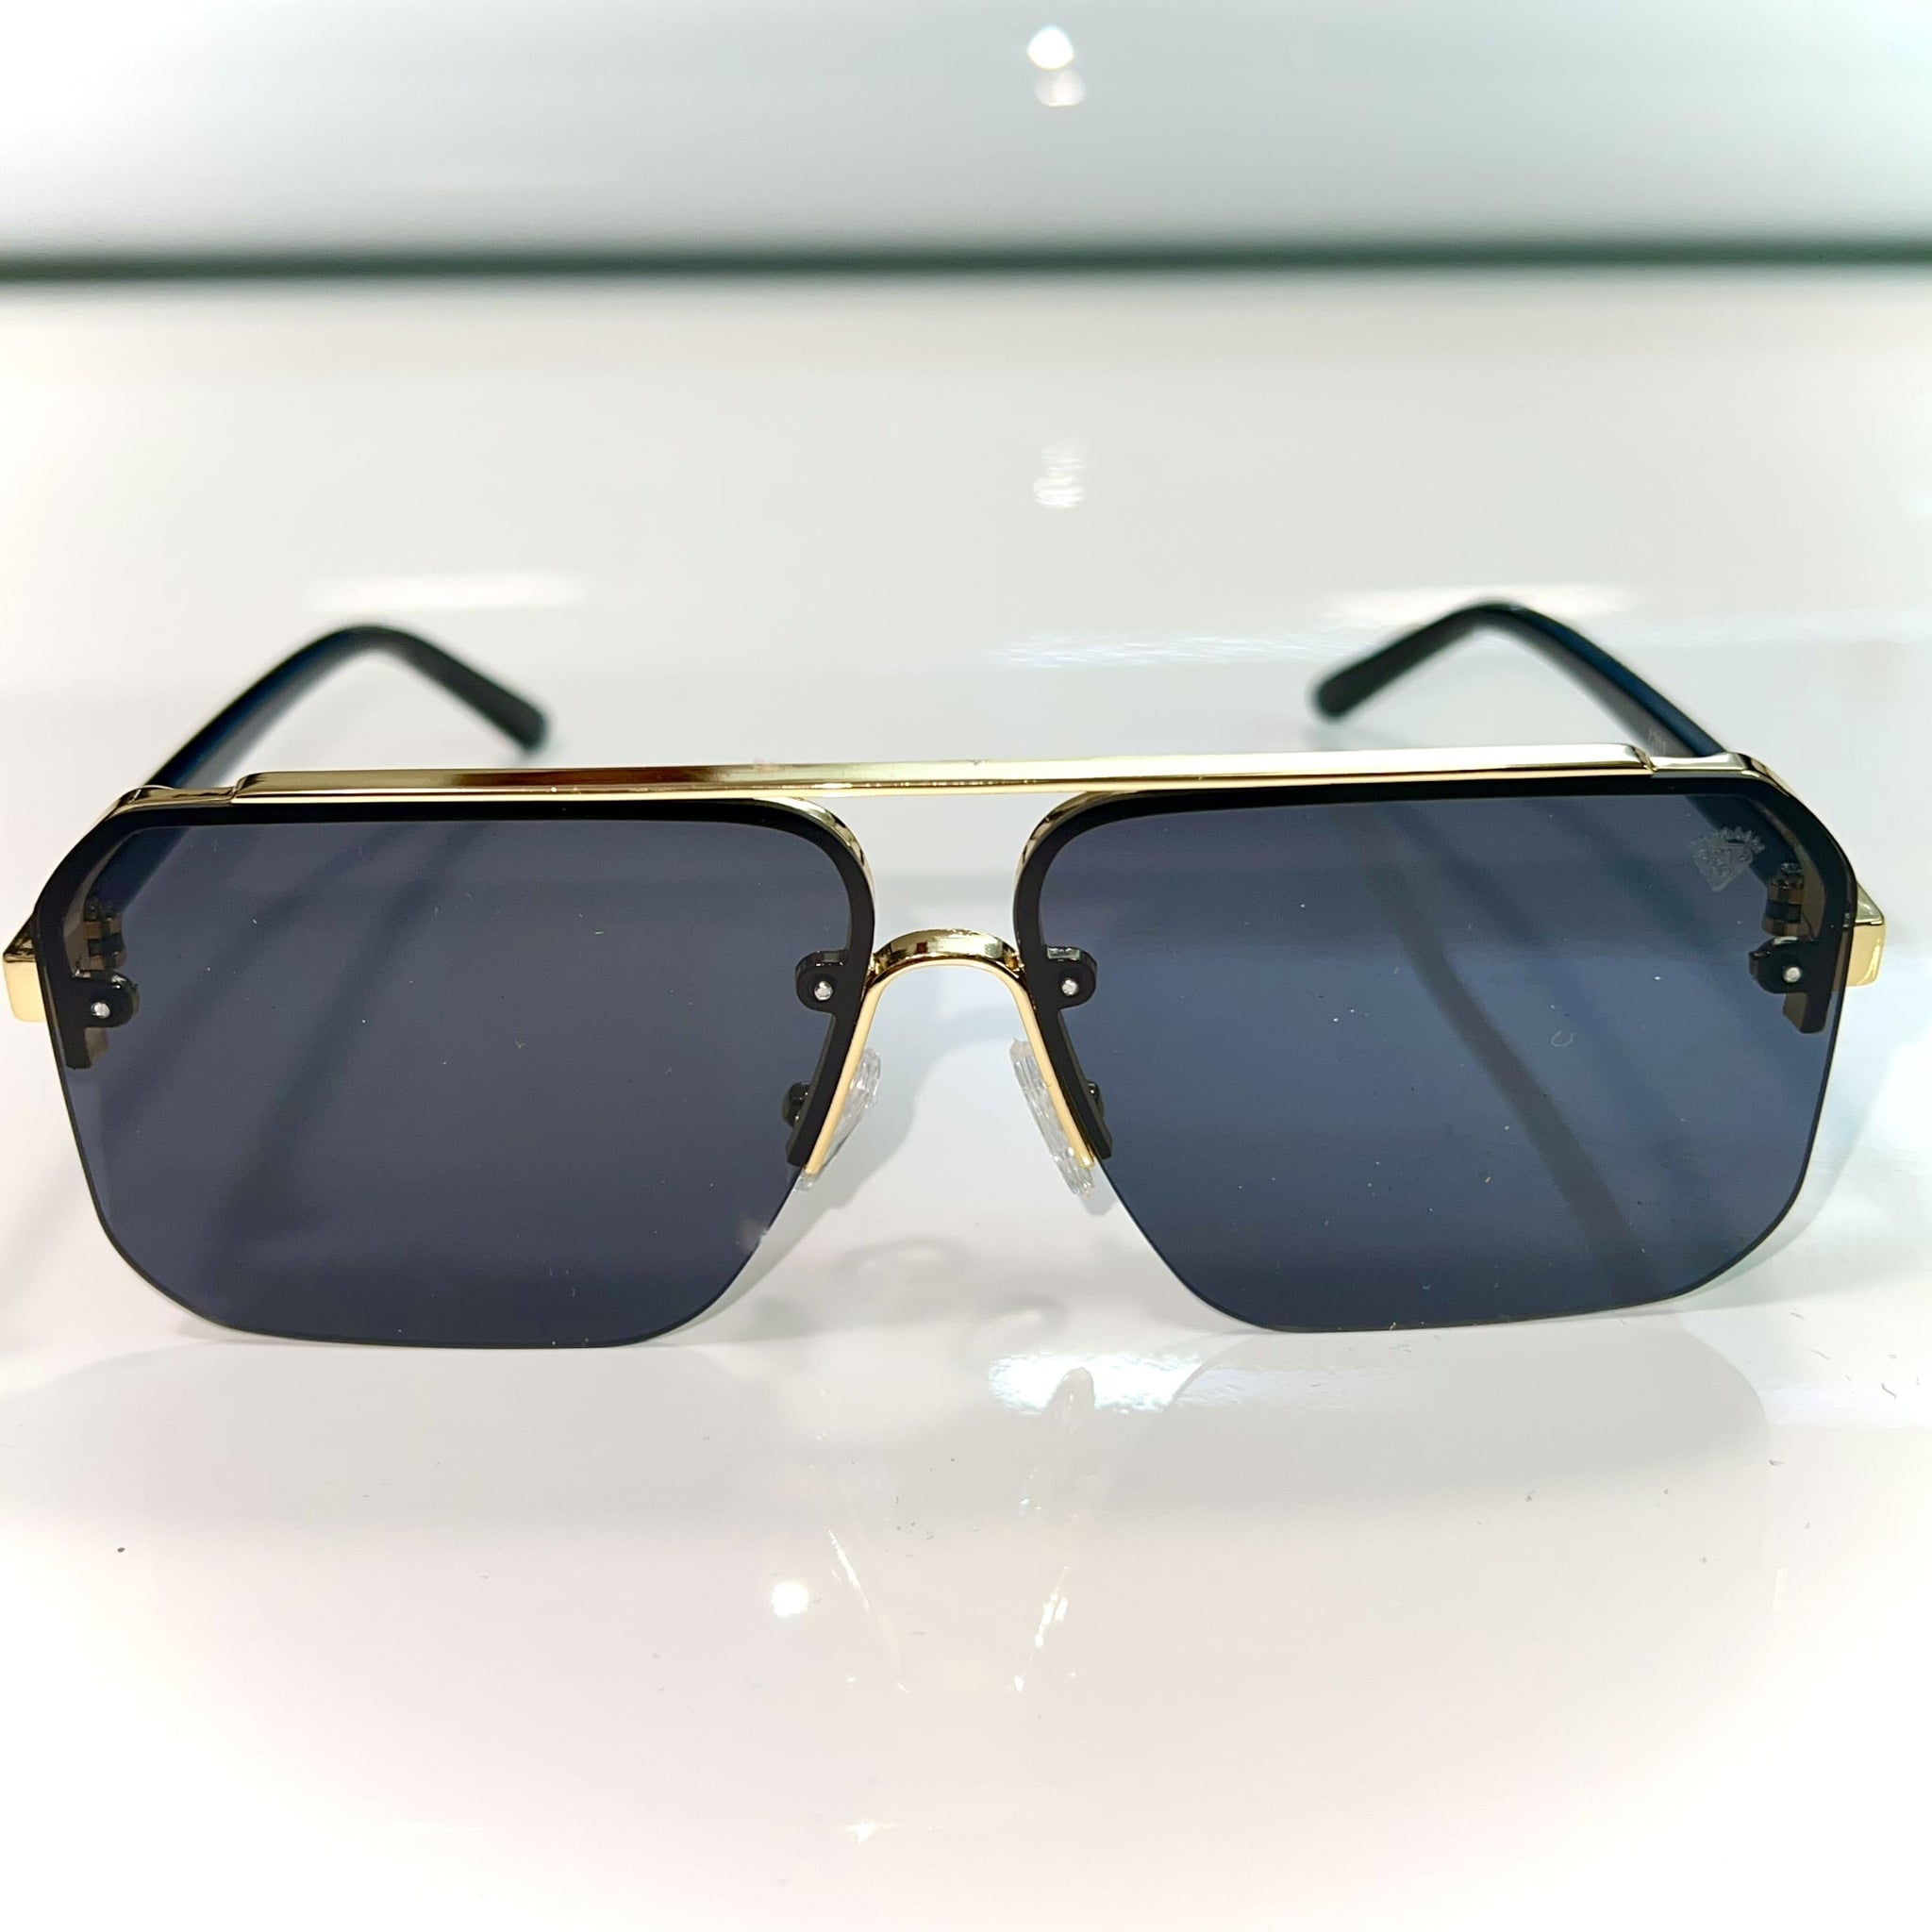 Macho Glasses - 14 carat gold plated / Silicon Side - Black Shade - Sehgal Glasses